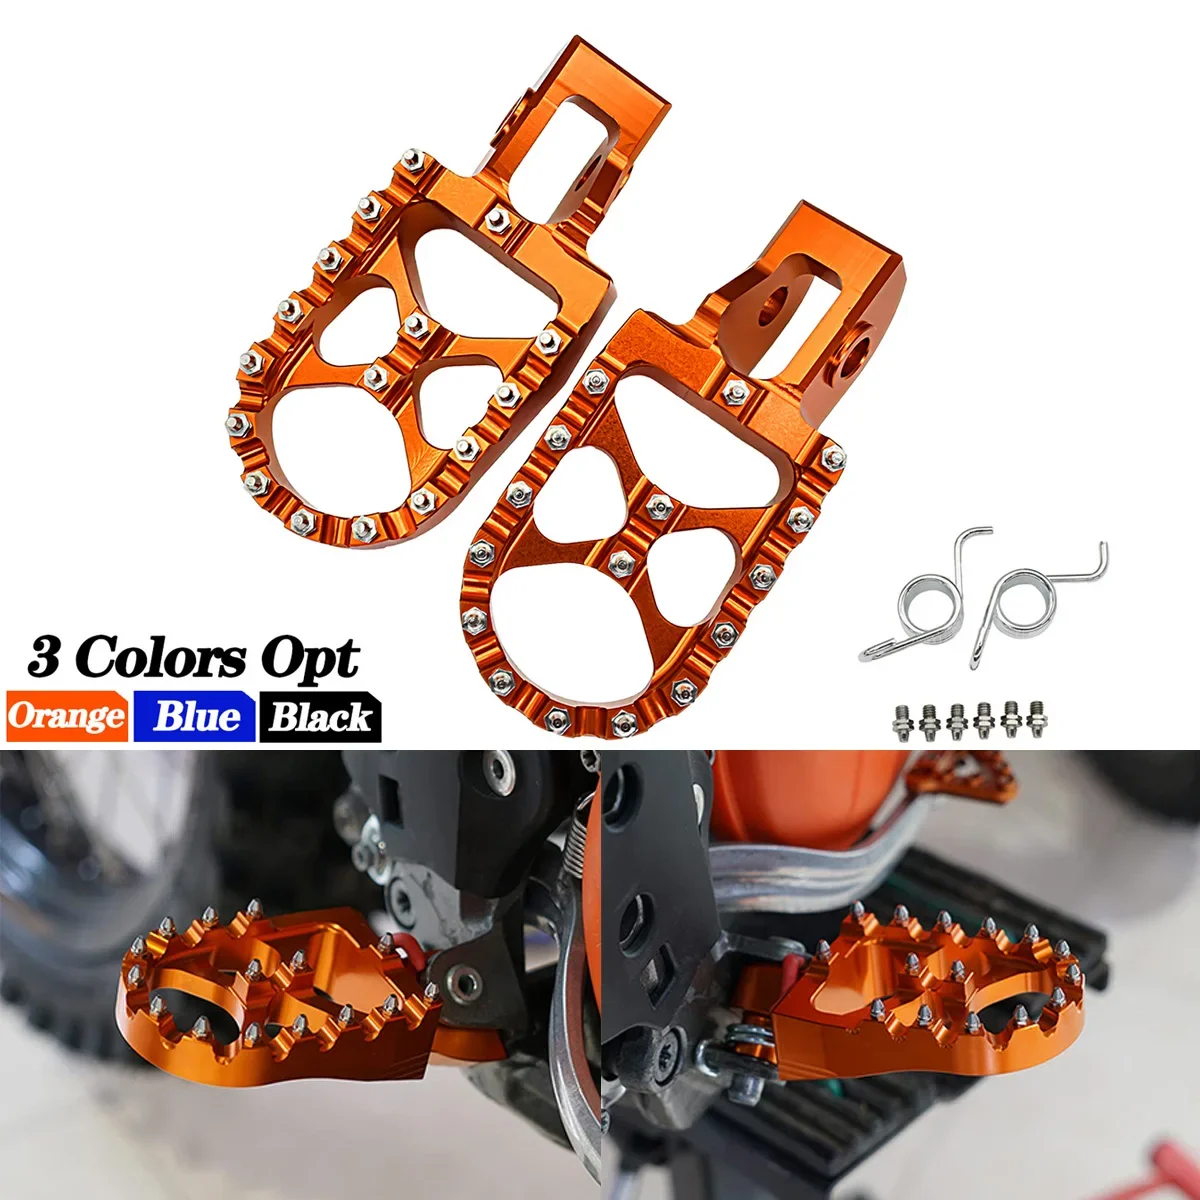 Motorcycle foot pegs footrest footpegs rests pedals for ktm exc excf xc xcf sx sxf 85 thumb200